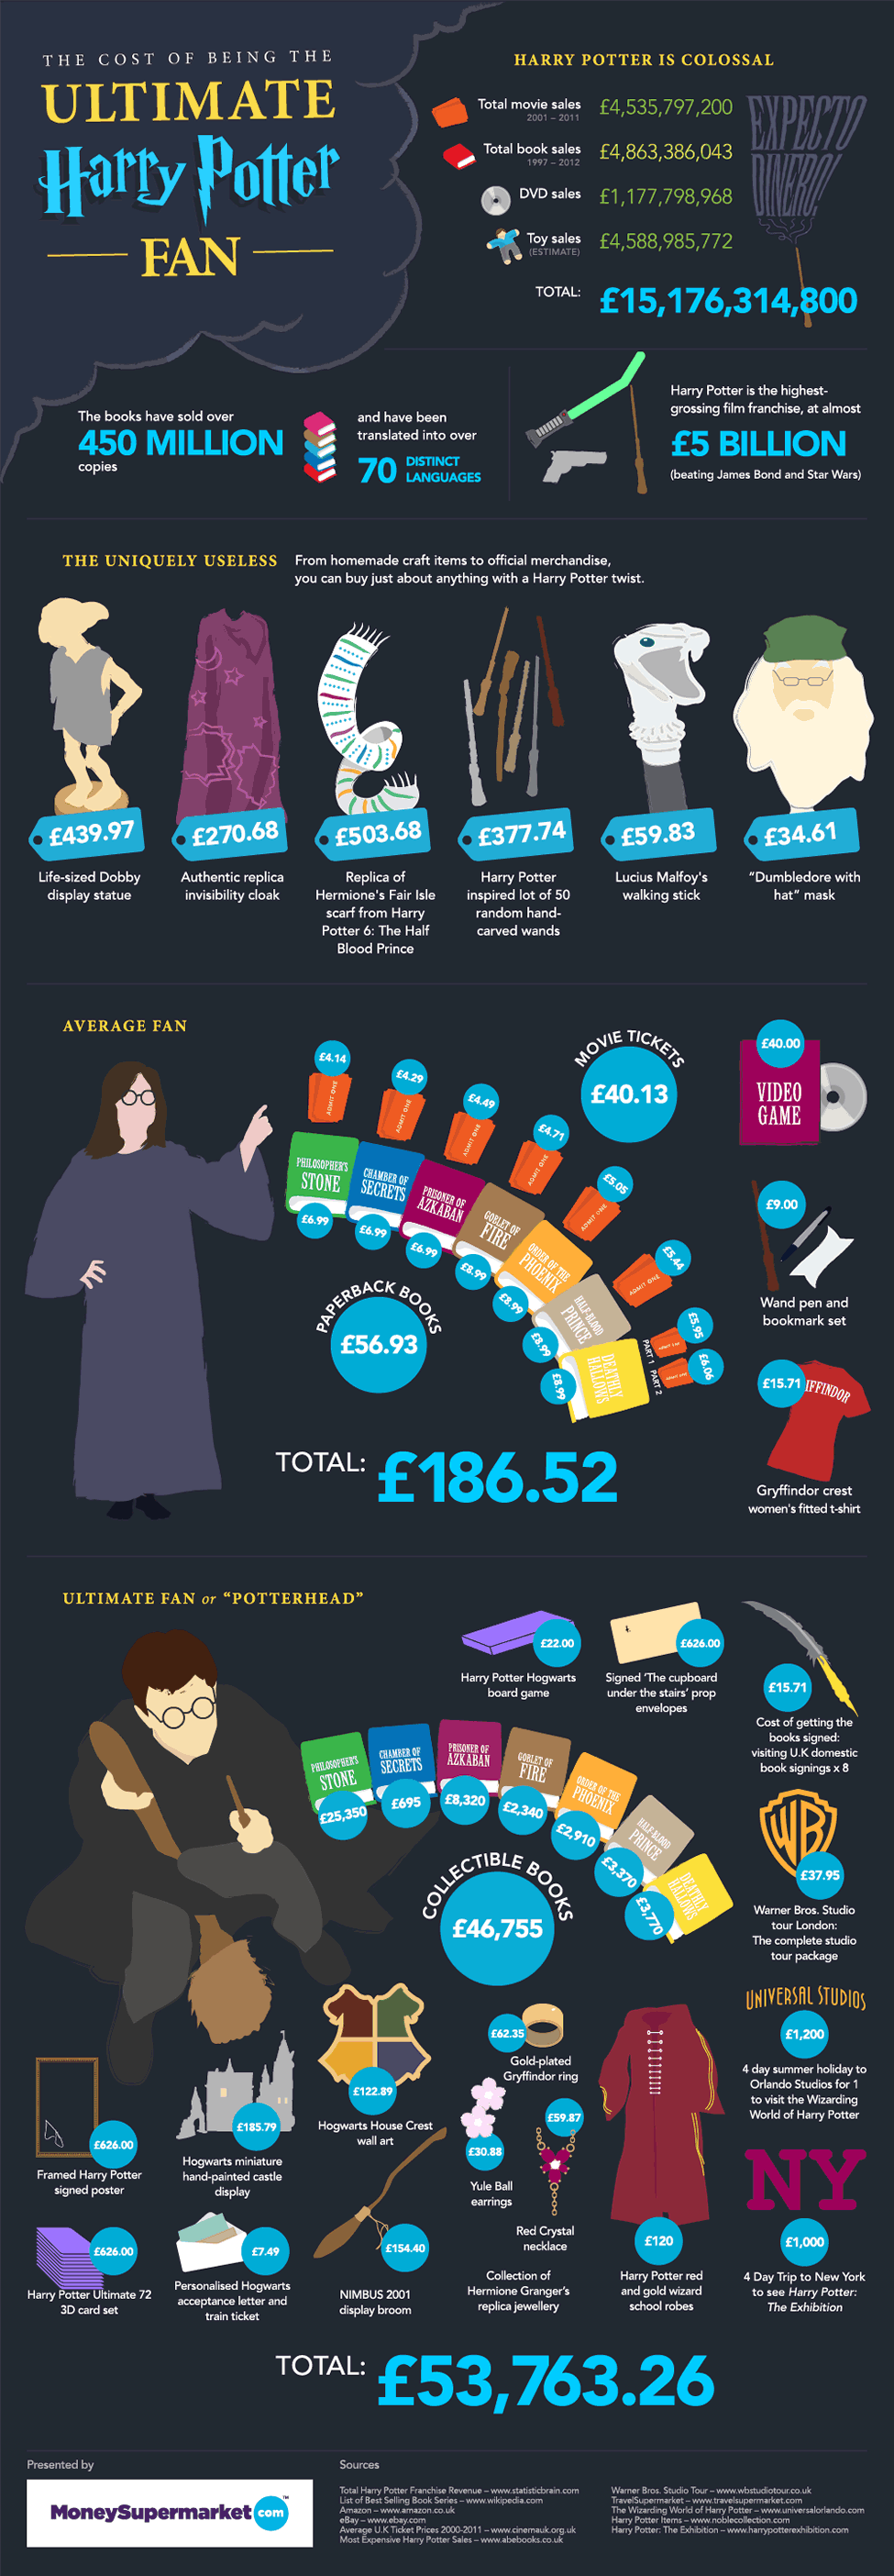 The Cost of Being the Ultimate Harry Potter Fan